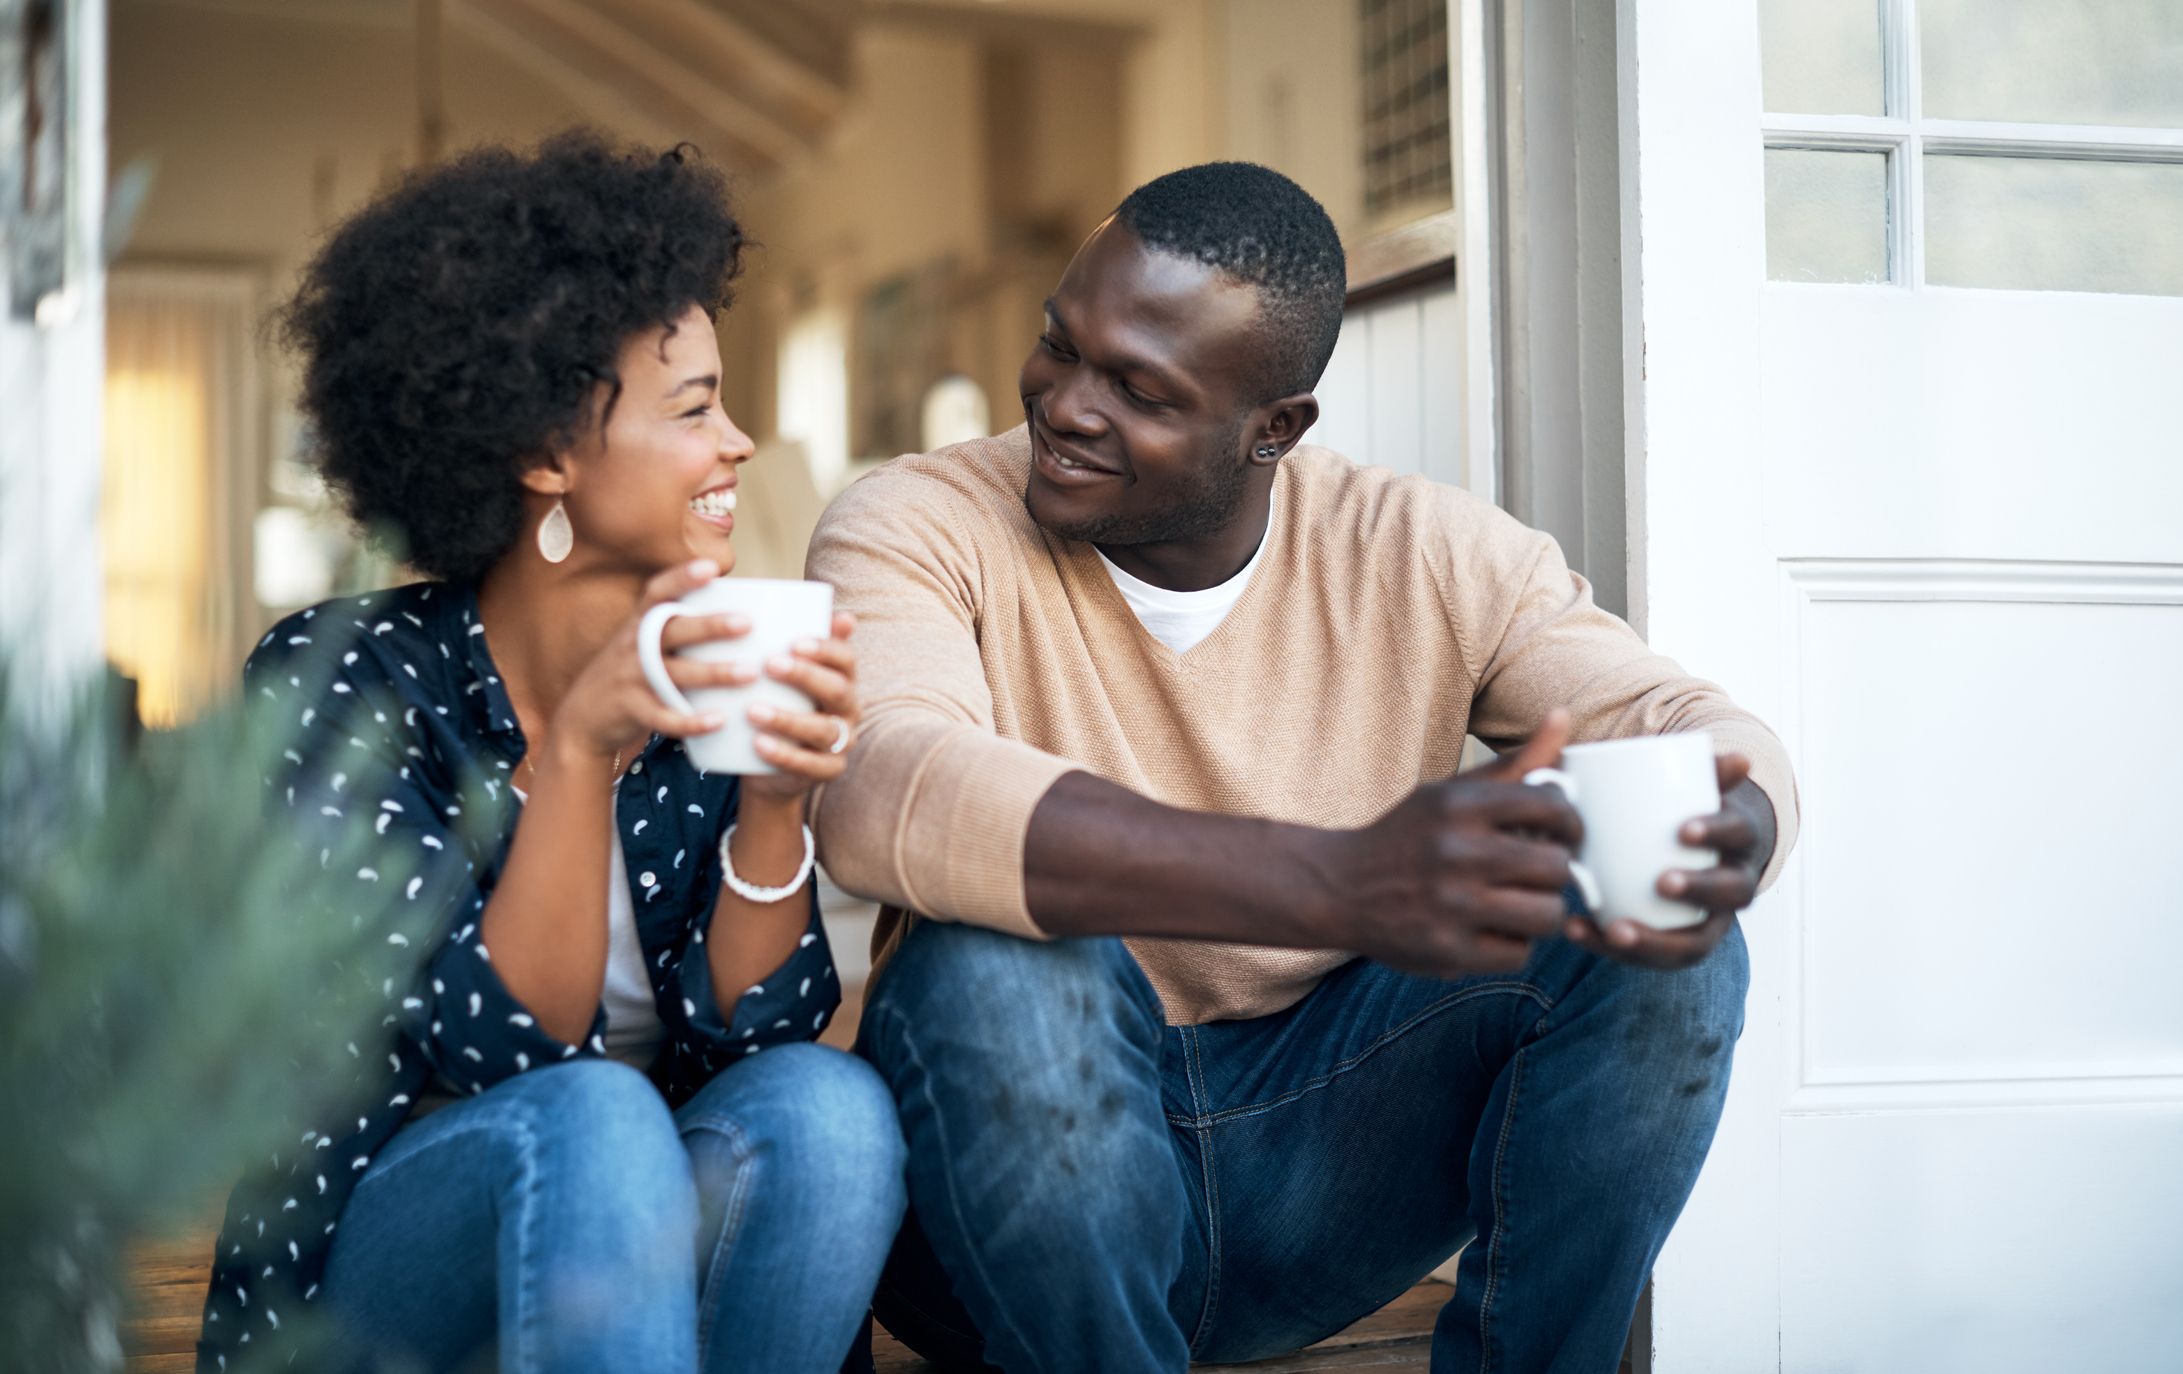 5 WAYS TO SUSTAIN YOUR MARRIAGE WHILE FIGHTING INFERTILITY